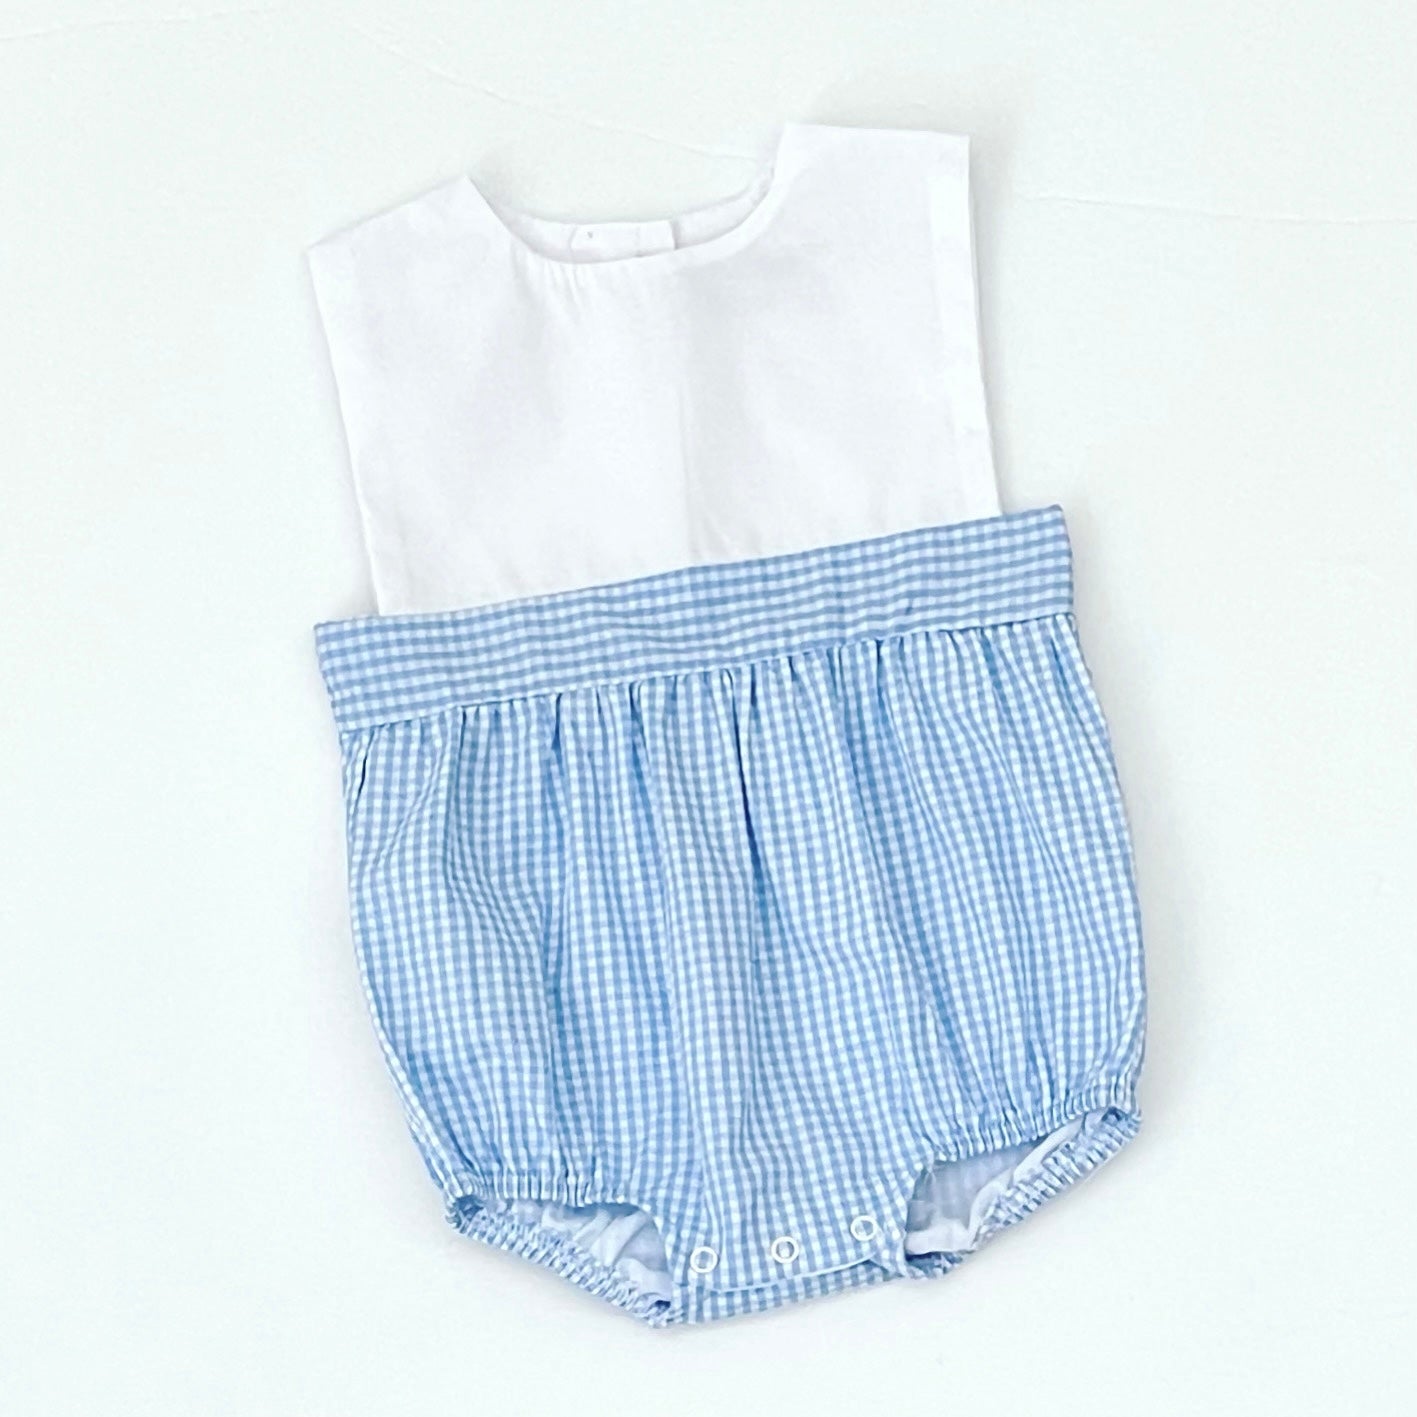 White Top Bubble - Blue Gingham